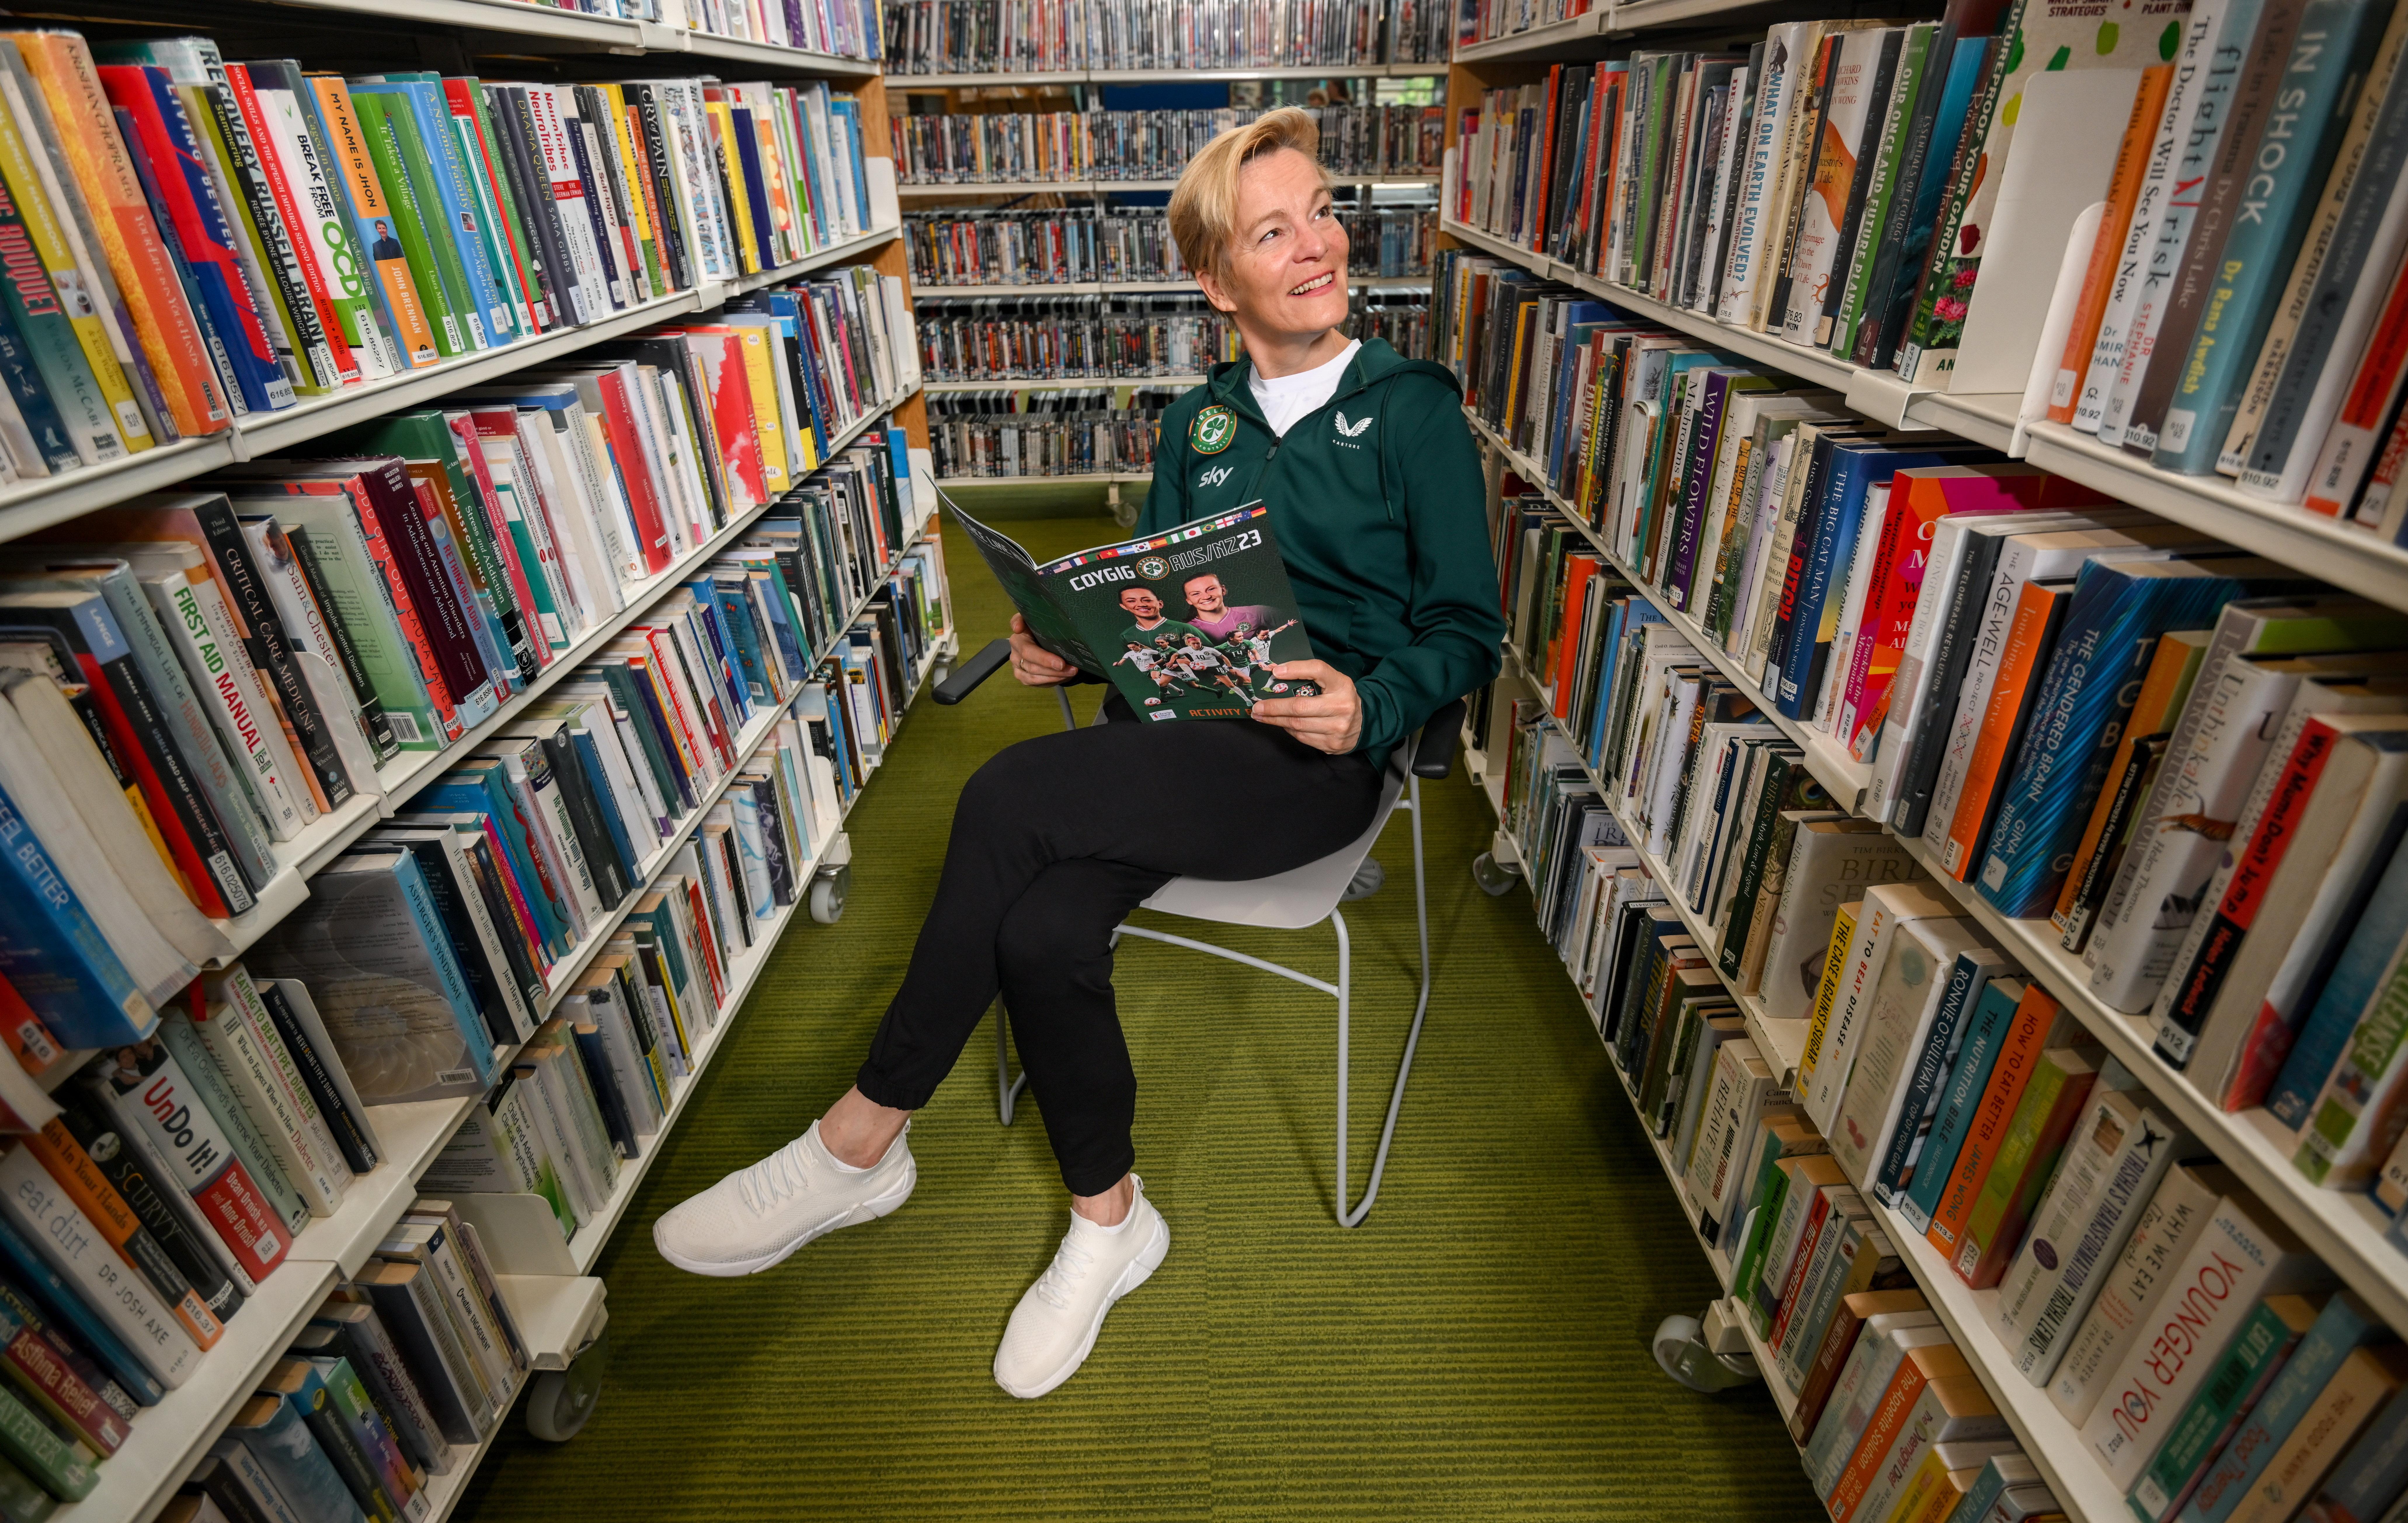 Woman sitting in library stacks reading a book